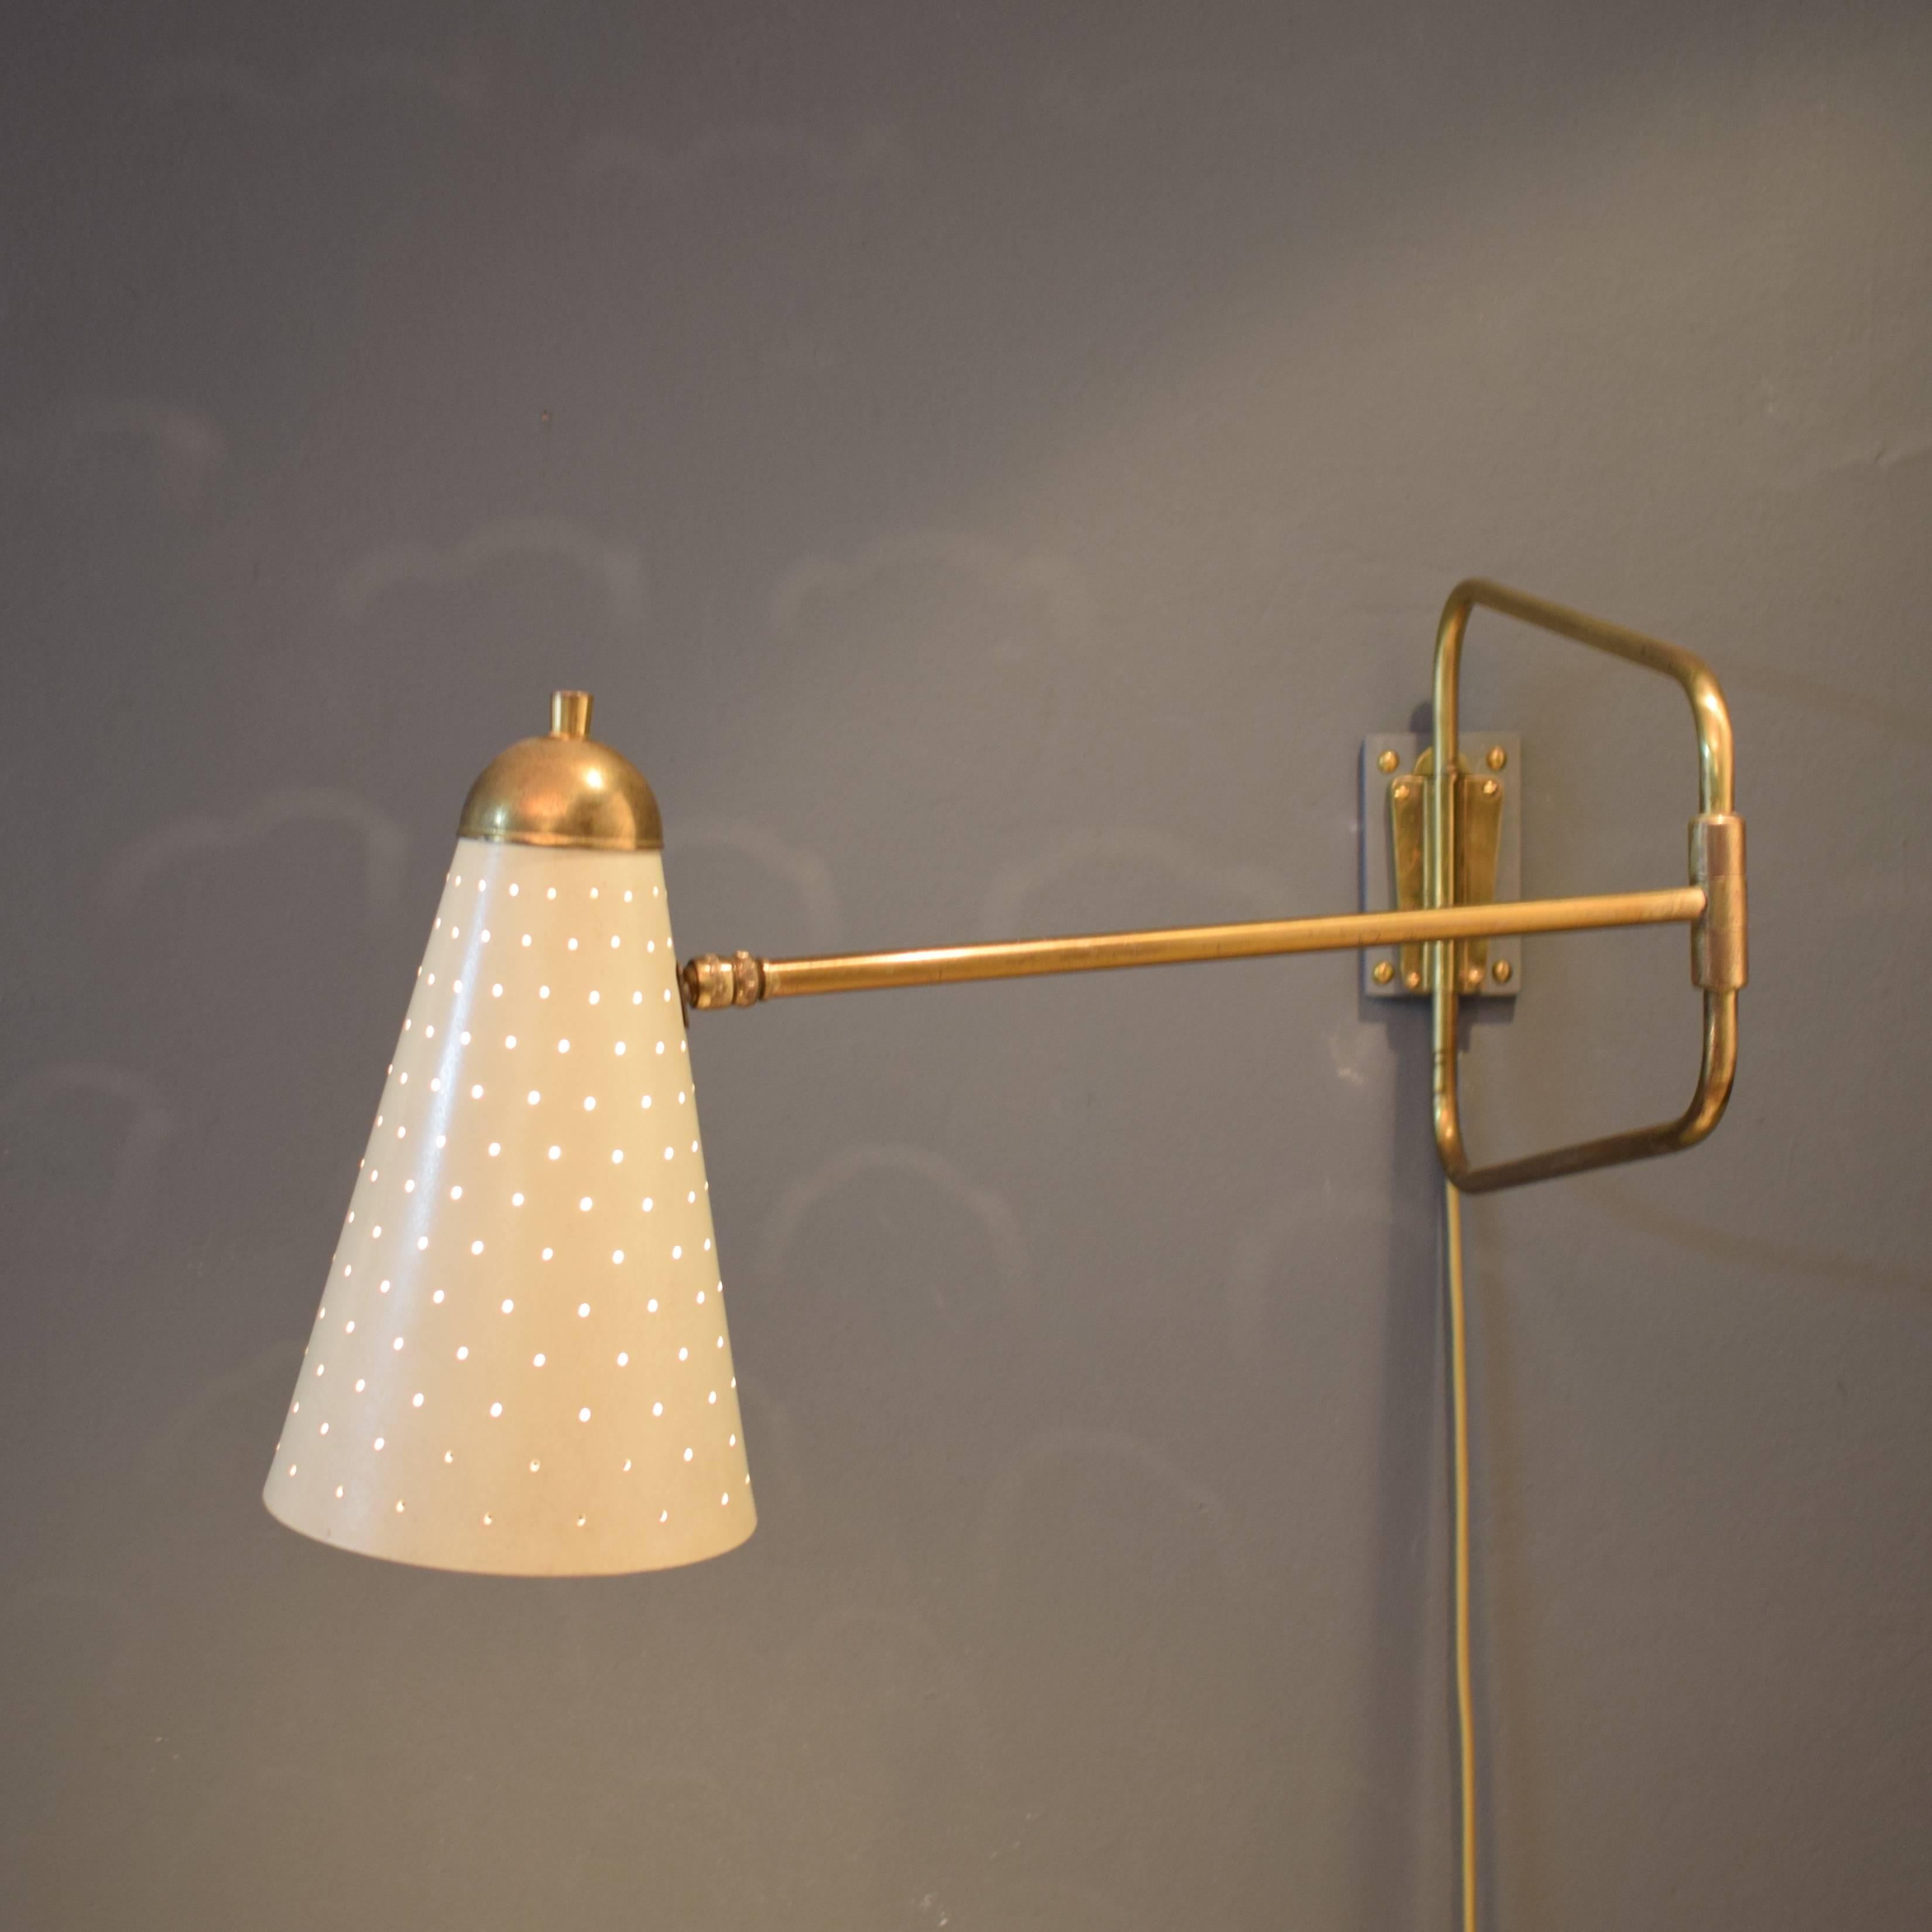 Mid-Century Modern Mid-Century French Brass Swing Wall Light/Scone by Jacques Biny, 1950s